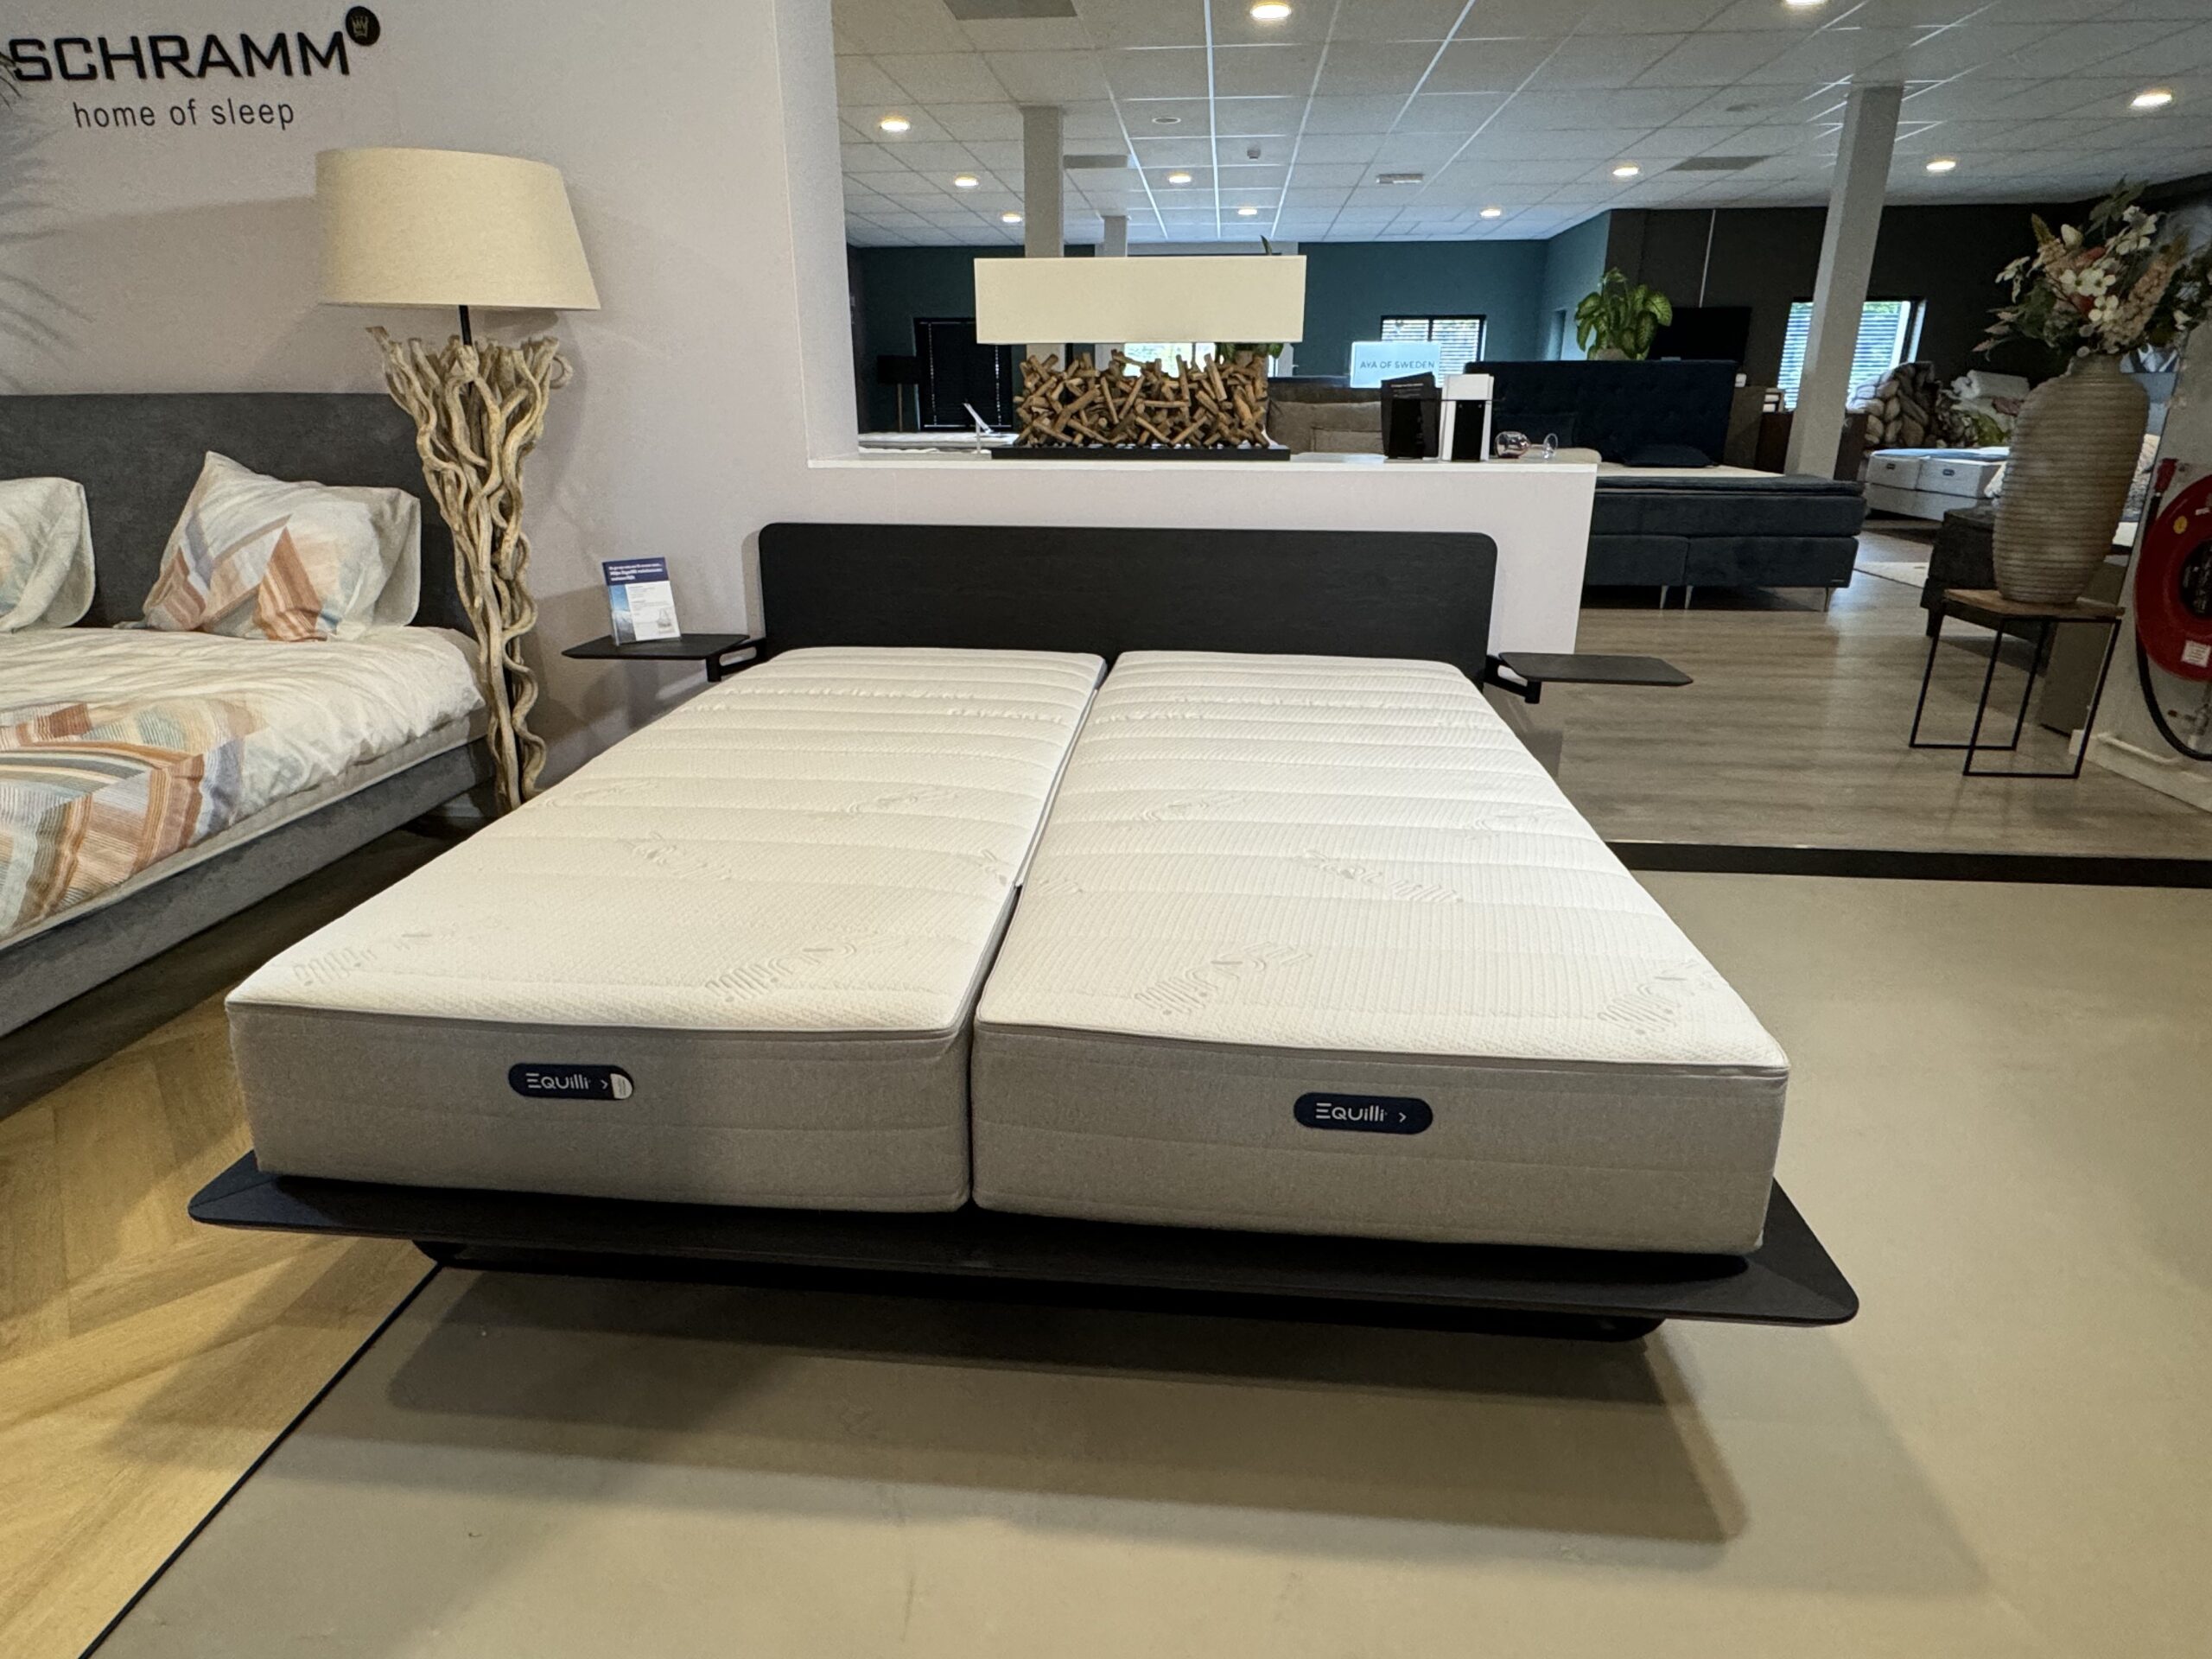 Equilli Less bed  | 180x210 | inleg boxspring  | Equilli Support matras  | Showroommodel